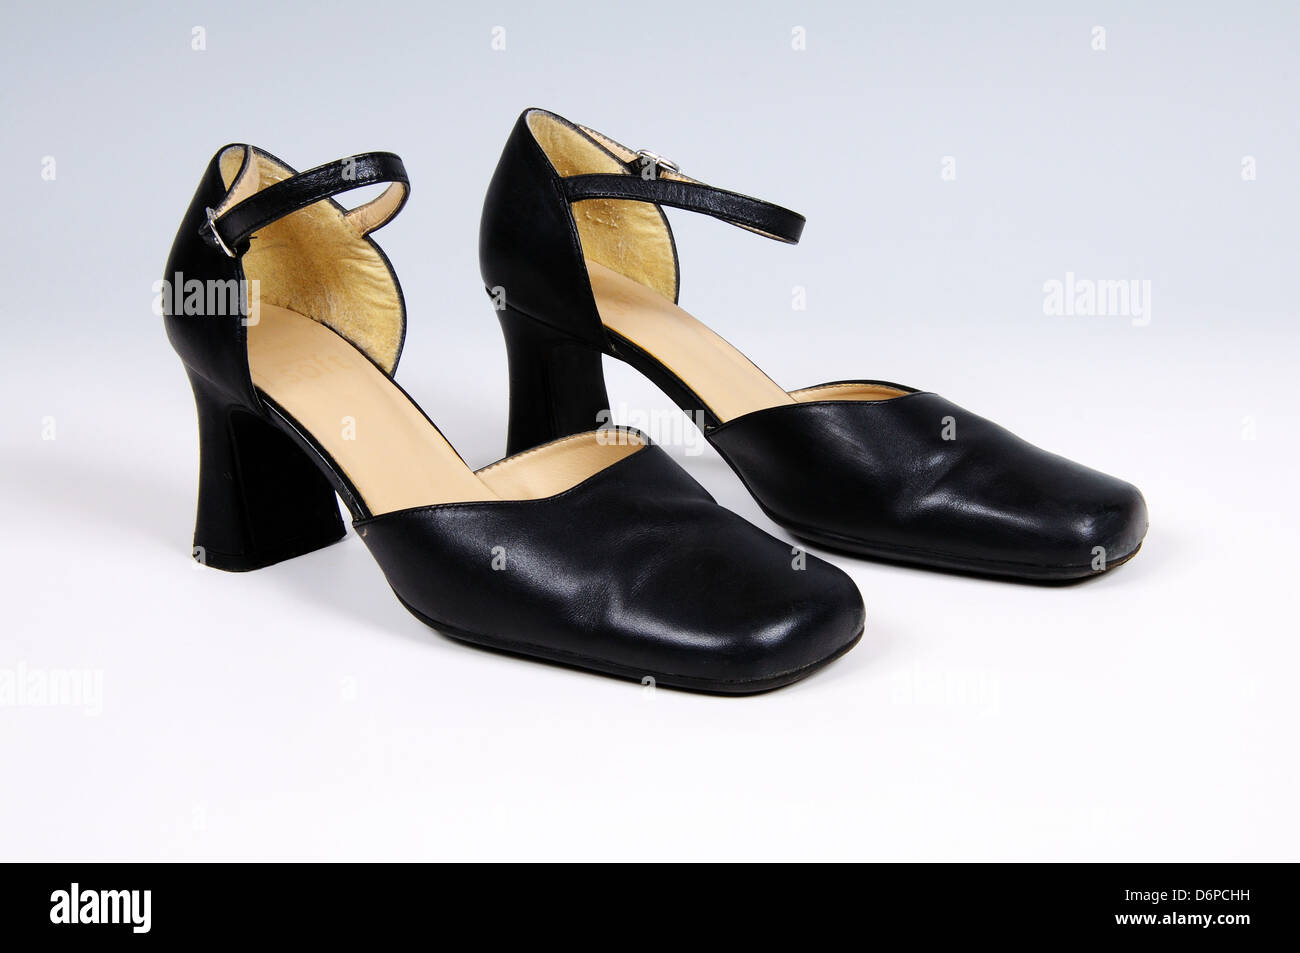 Pair of black leather womens shoes against a plain background. Stock Photo